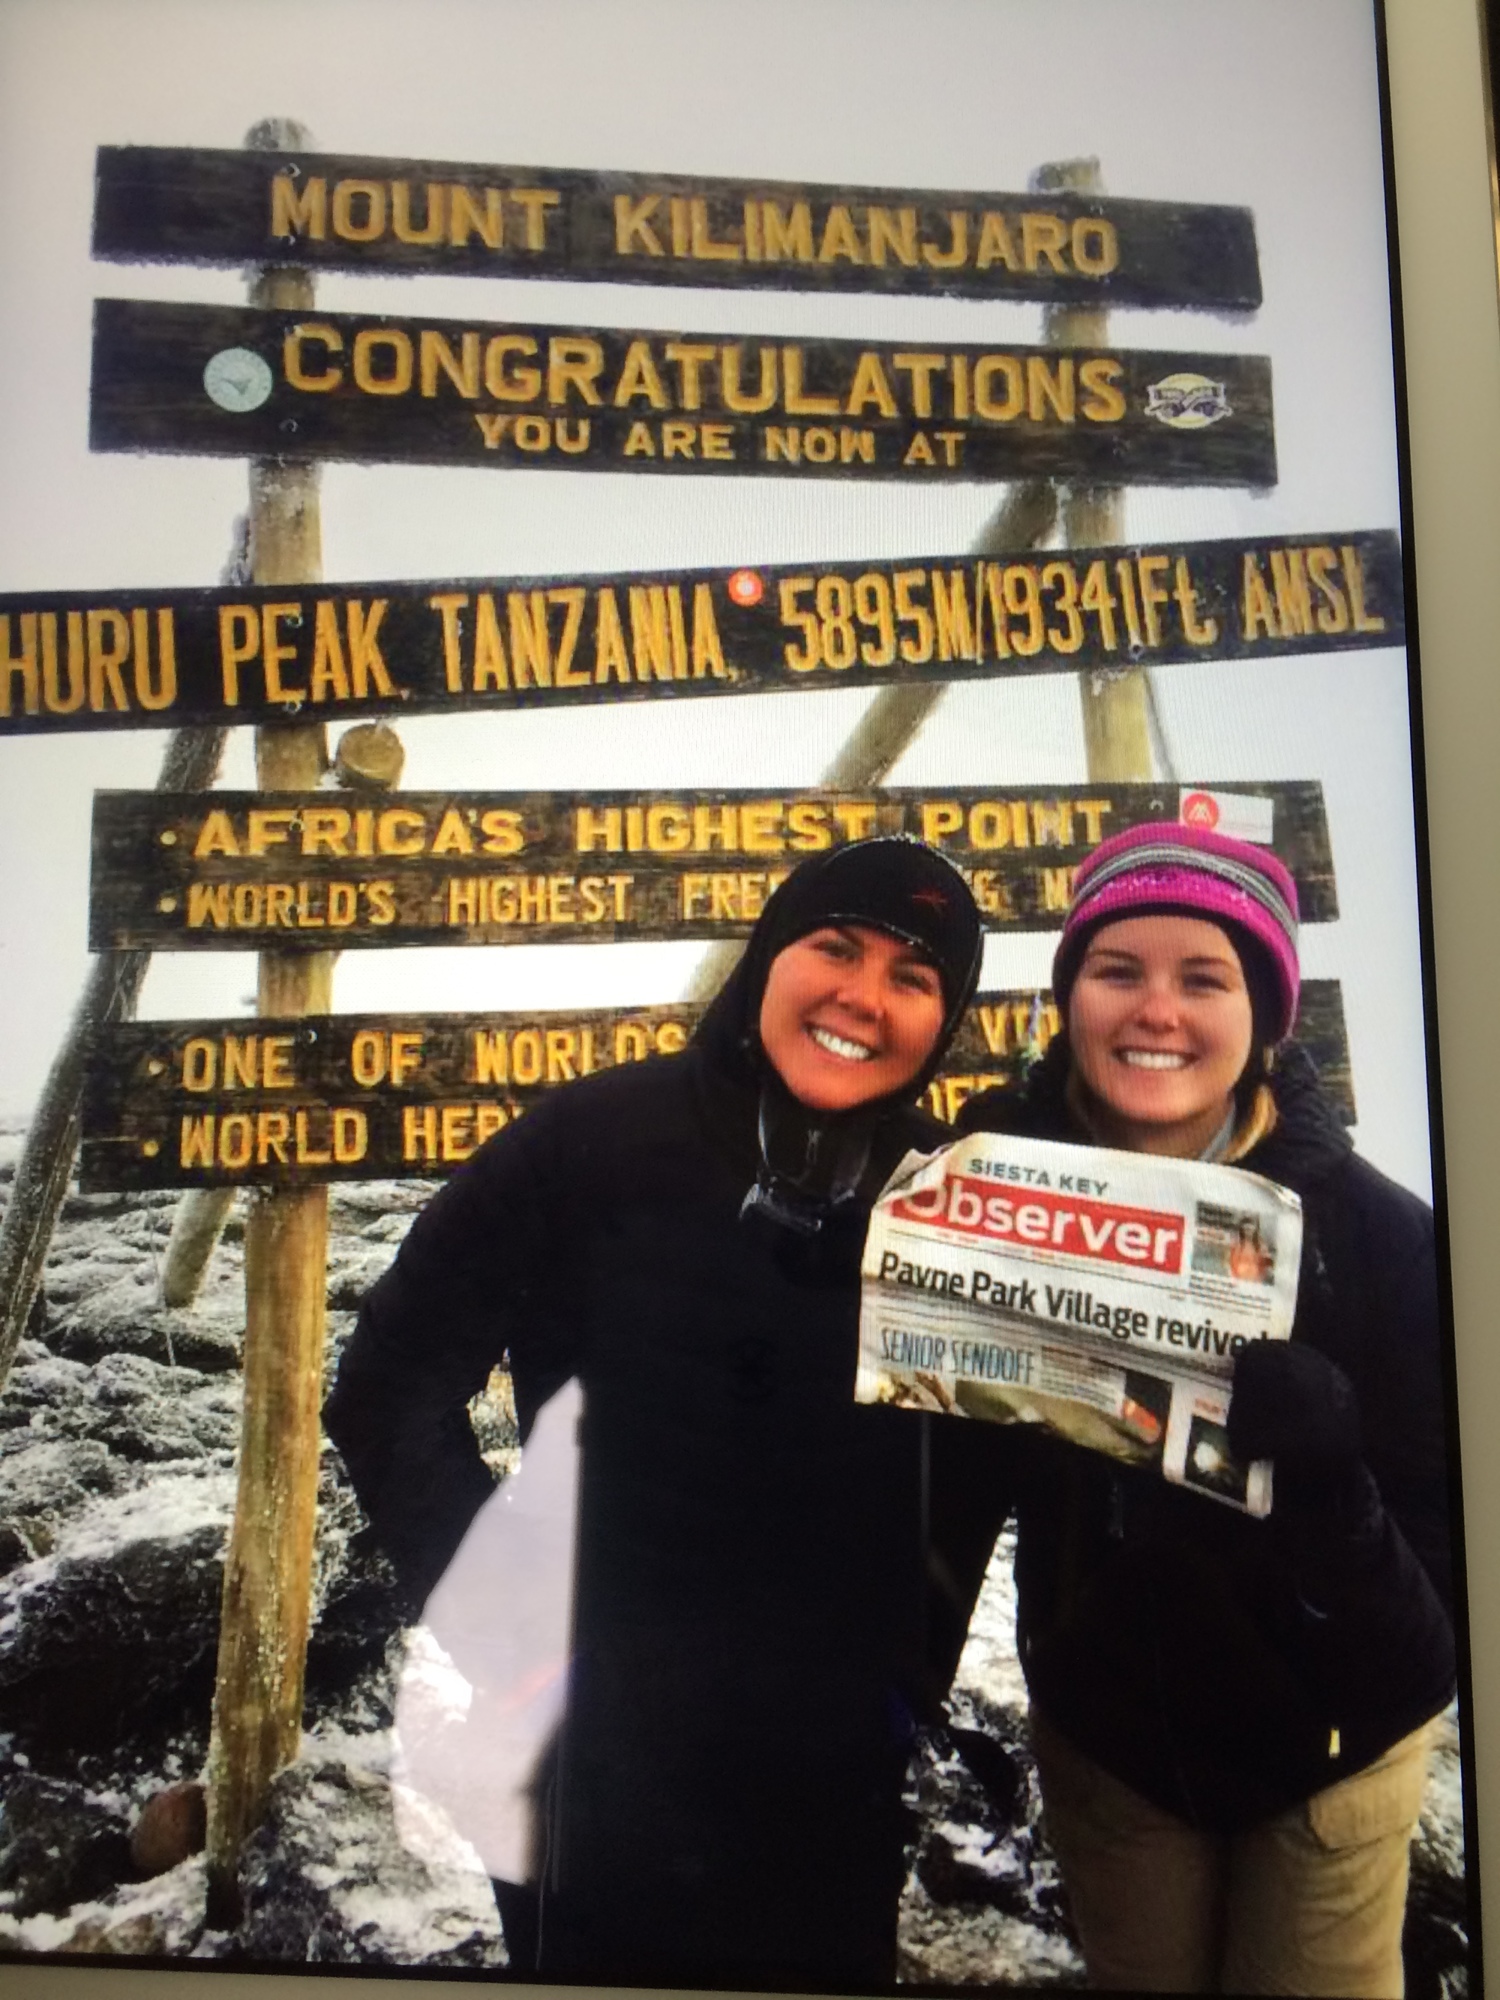 aylor and Sarah Karp climbed Mount Kilimanjaro with their Siesta Key Observer over the summer. The climb was to raise funds to build a new school in Tanzania. The Karps were there for the opening of the new school.